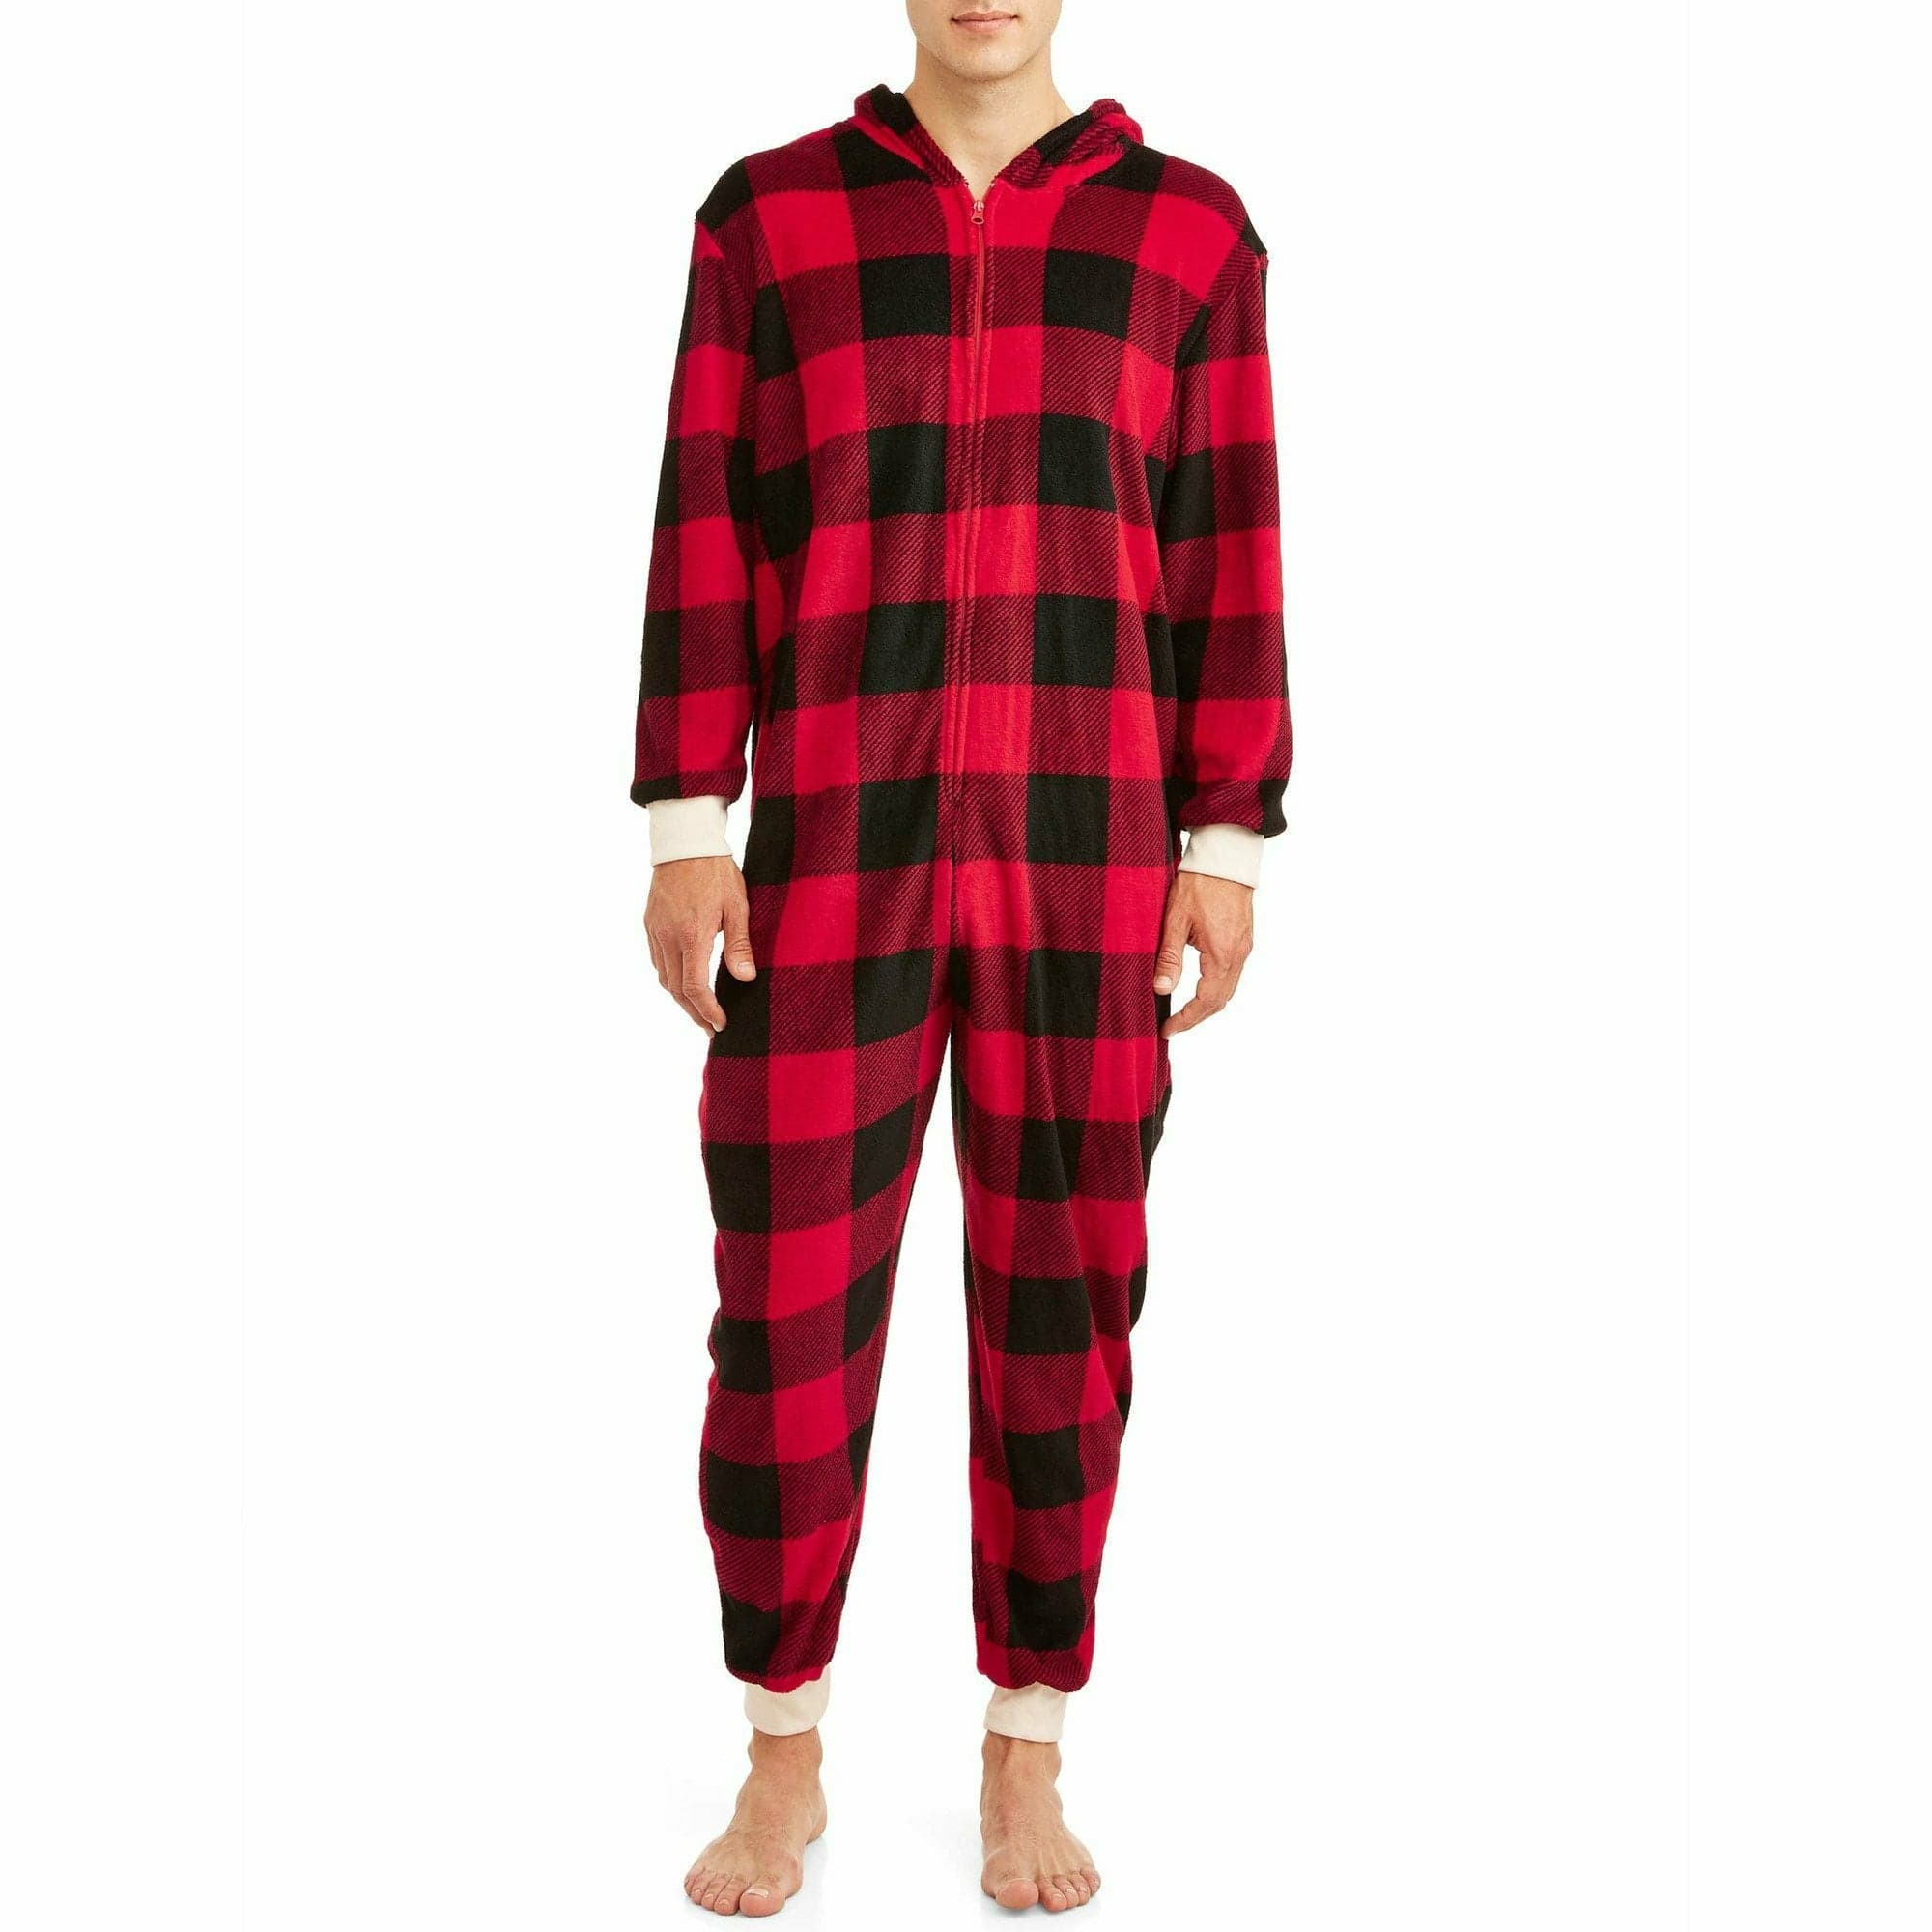 Ultimate Party Super Stores HOLIDAY: CHRISTMAS Men's M Men's Happy Holla Days Pajama Onesie